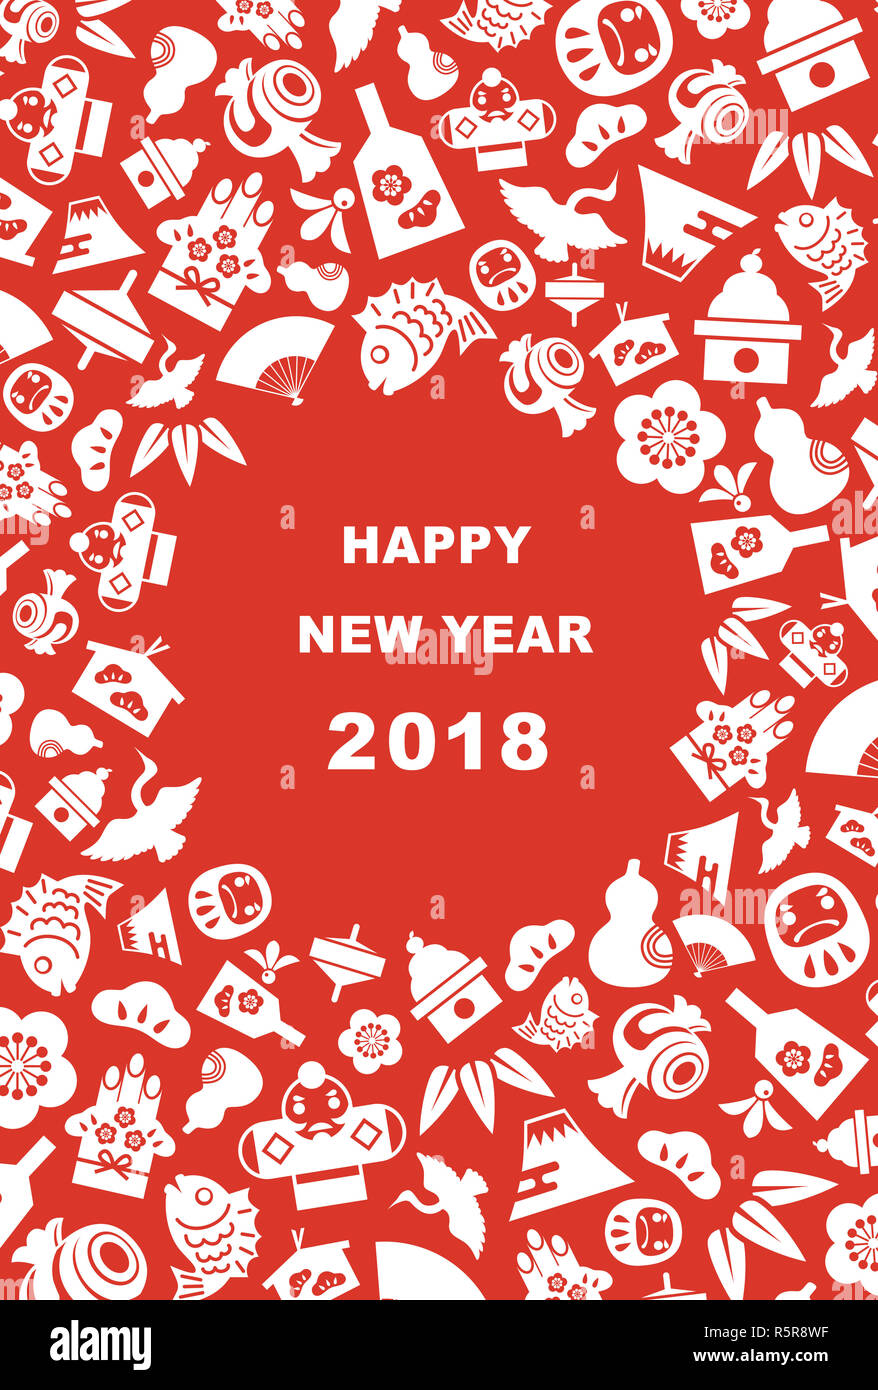 New Year card for year 2018 with Japanese new year good luck elements Stock Photo